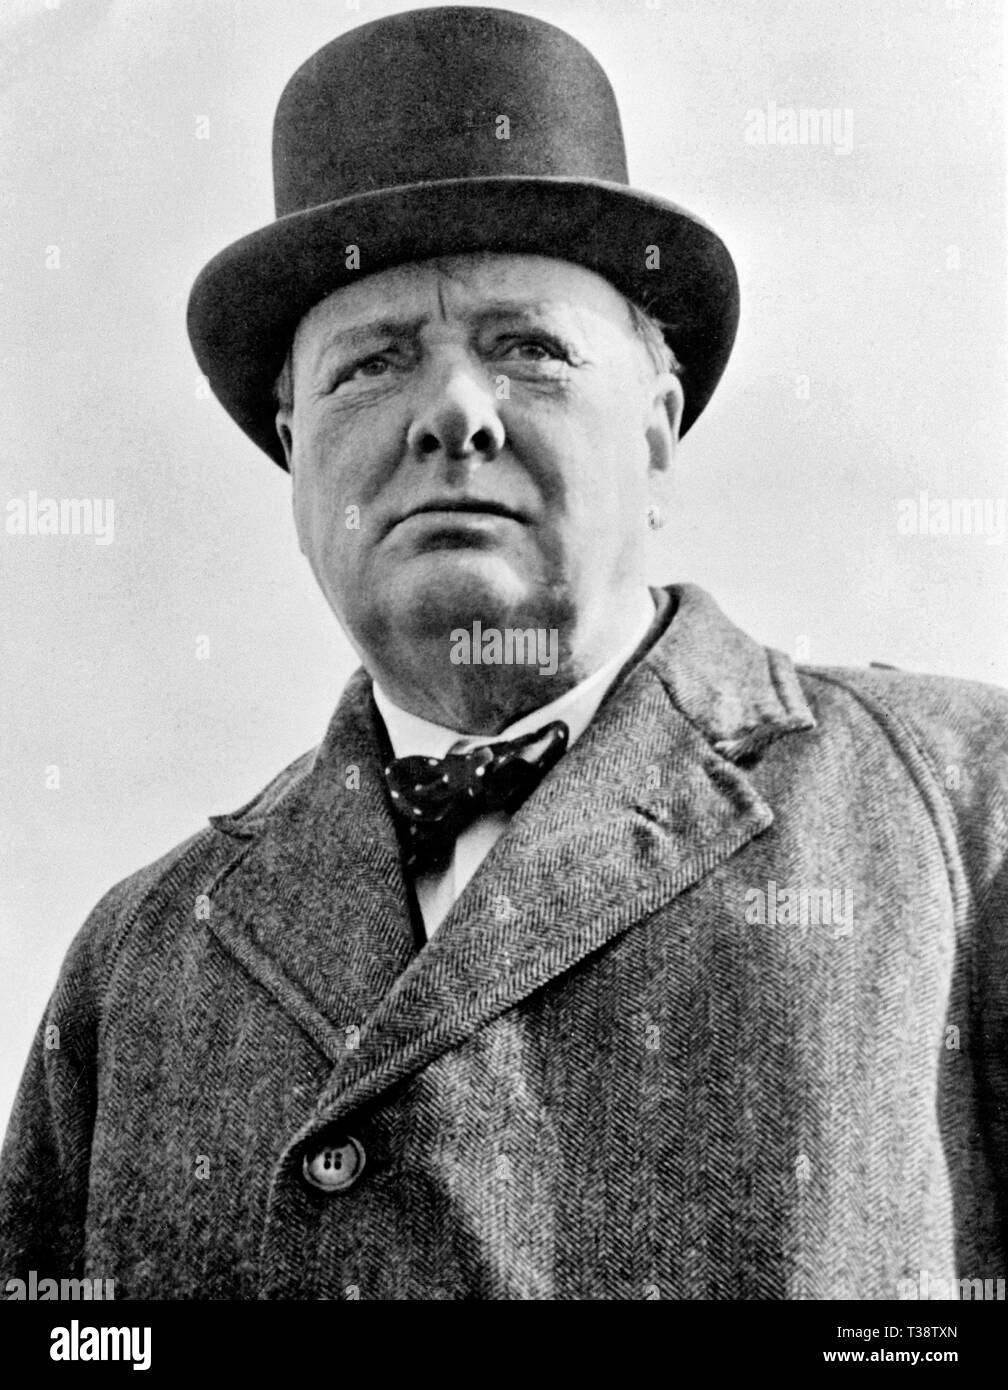 Sir Winston Churchill. 1942 Banque D'Images